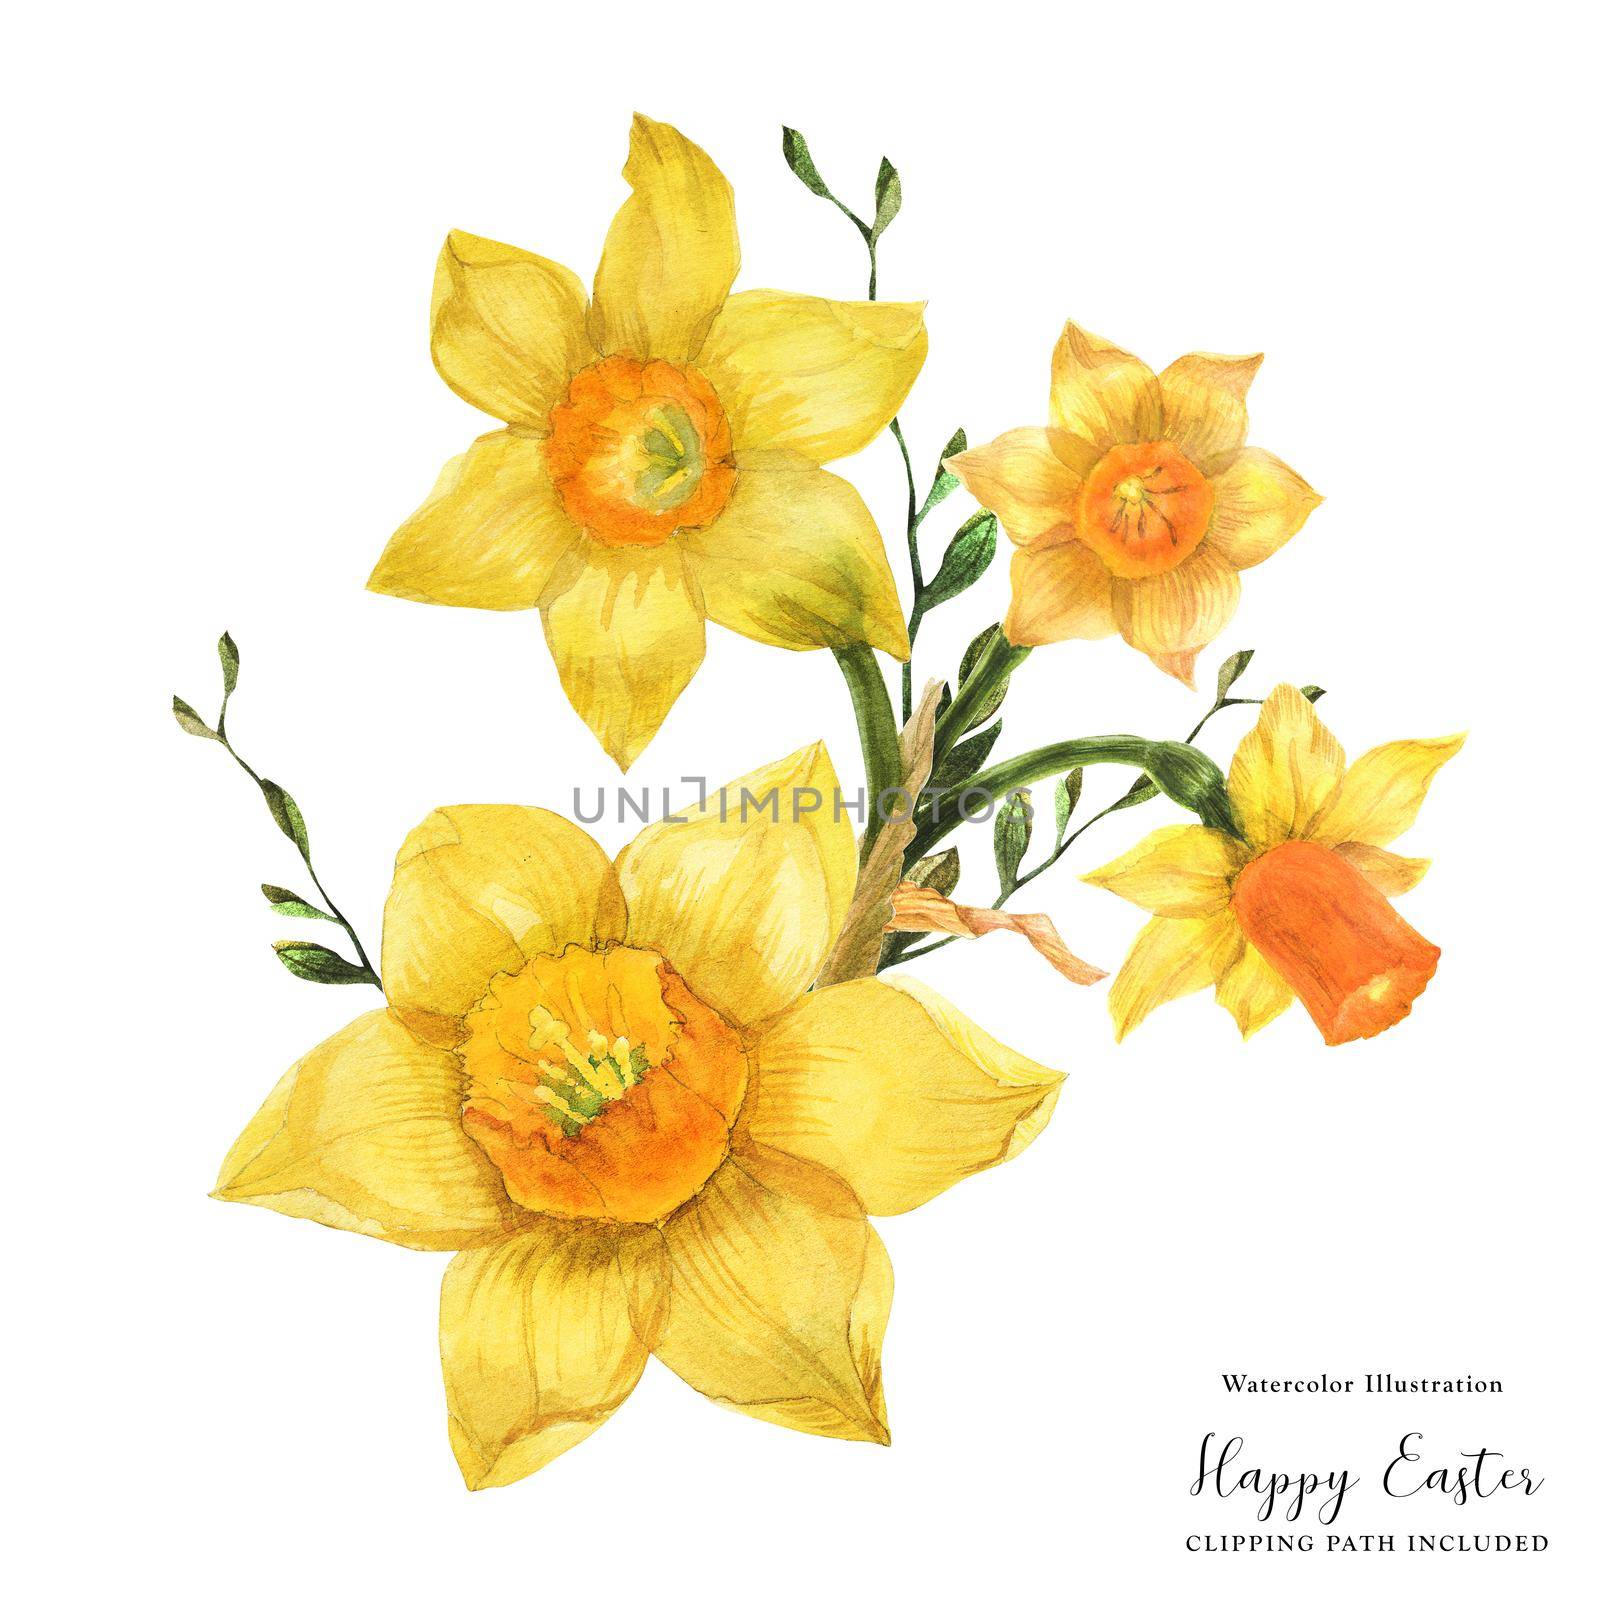 Yellow spring floral bouquet with daffodil flowers on a white background, clipping path included